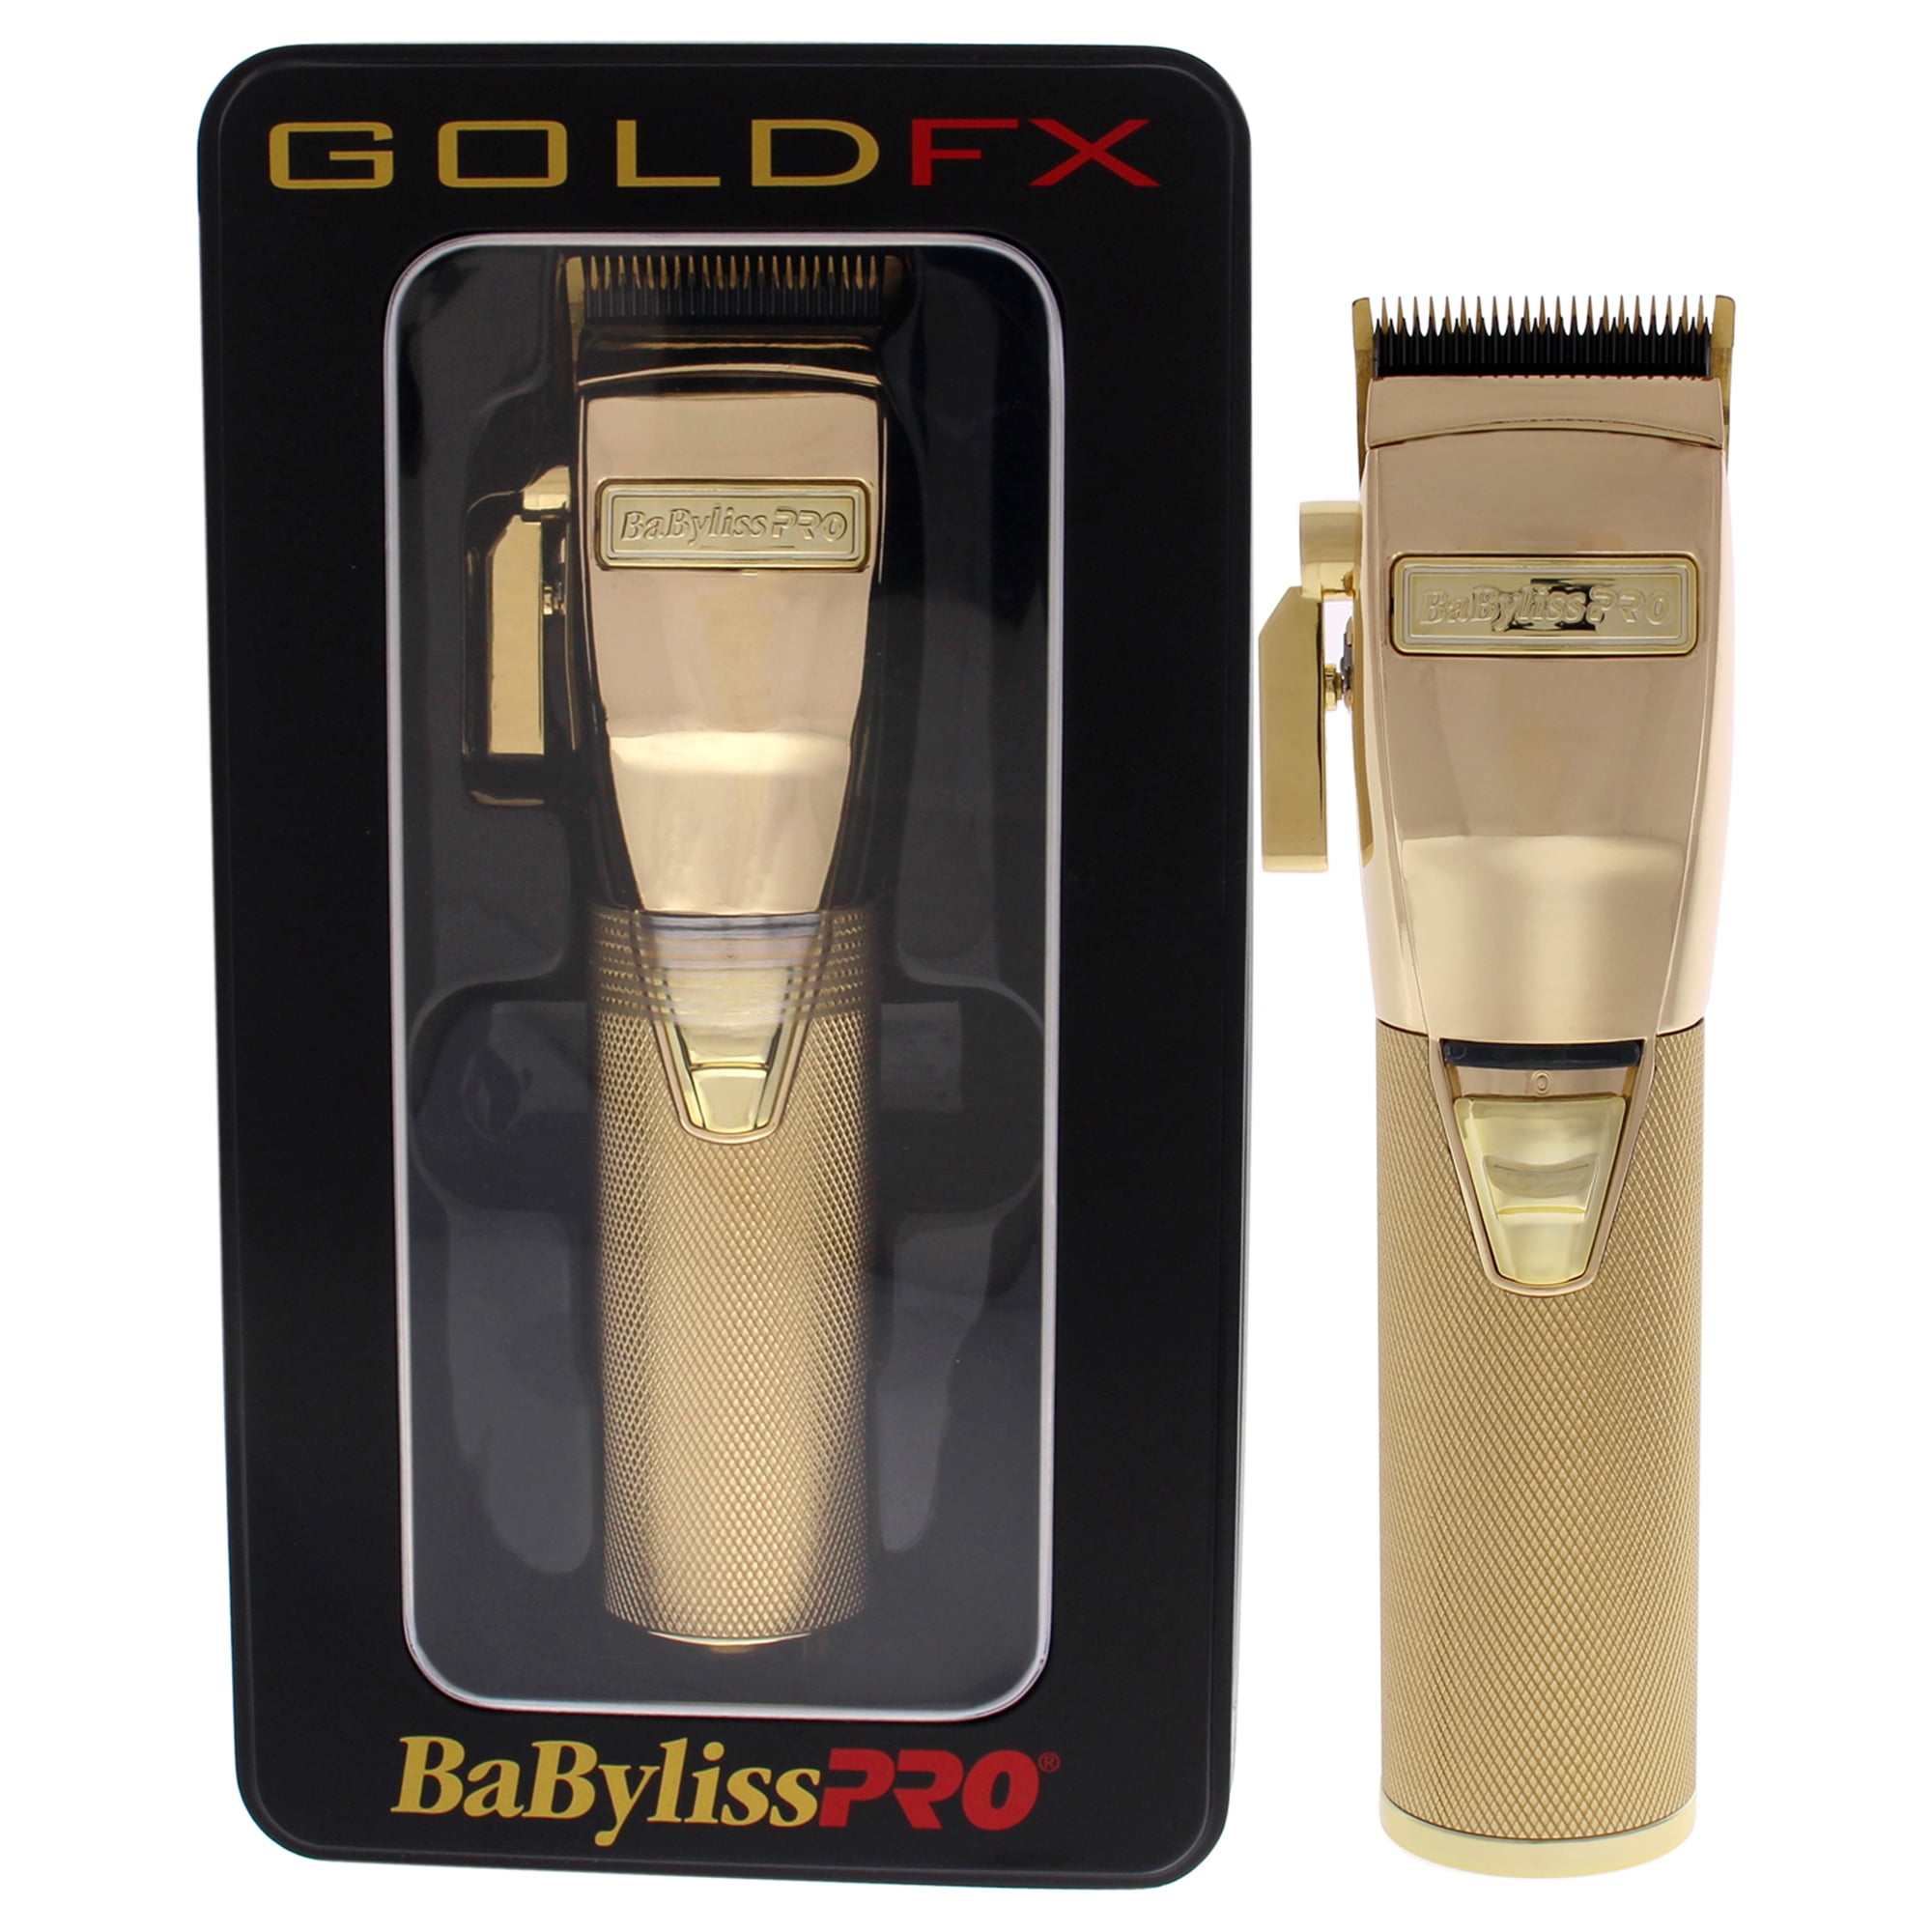 babyliss gold fx clipper review